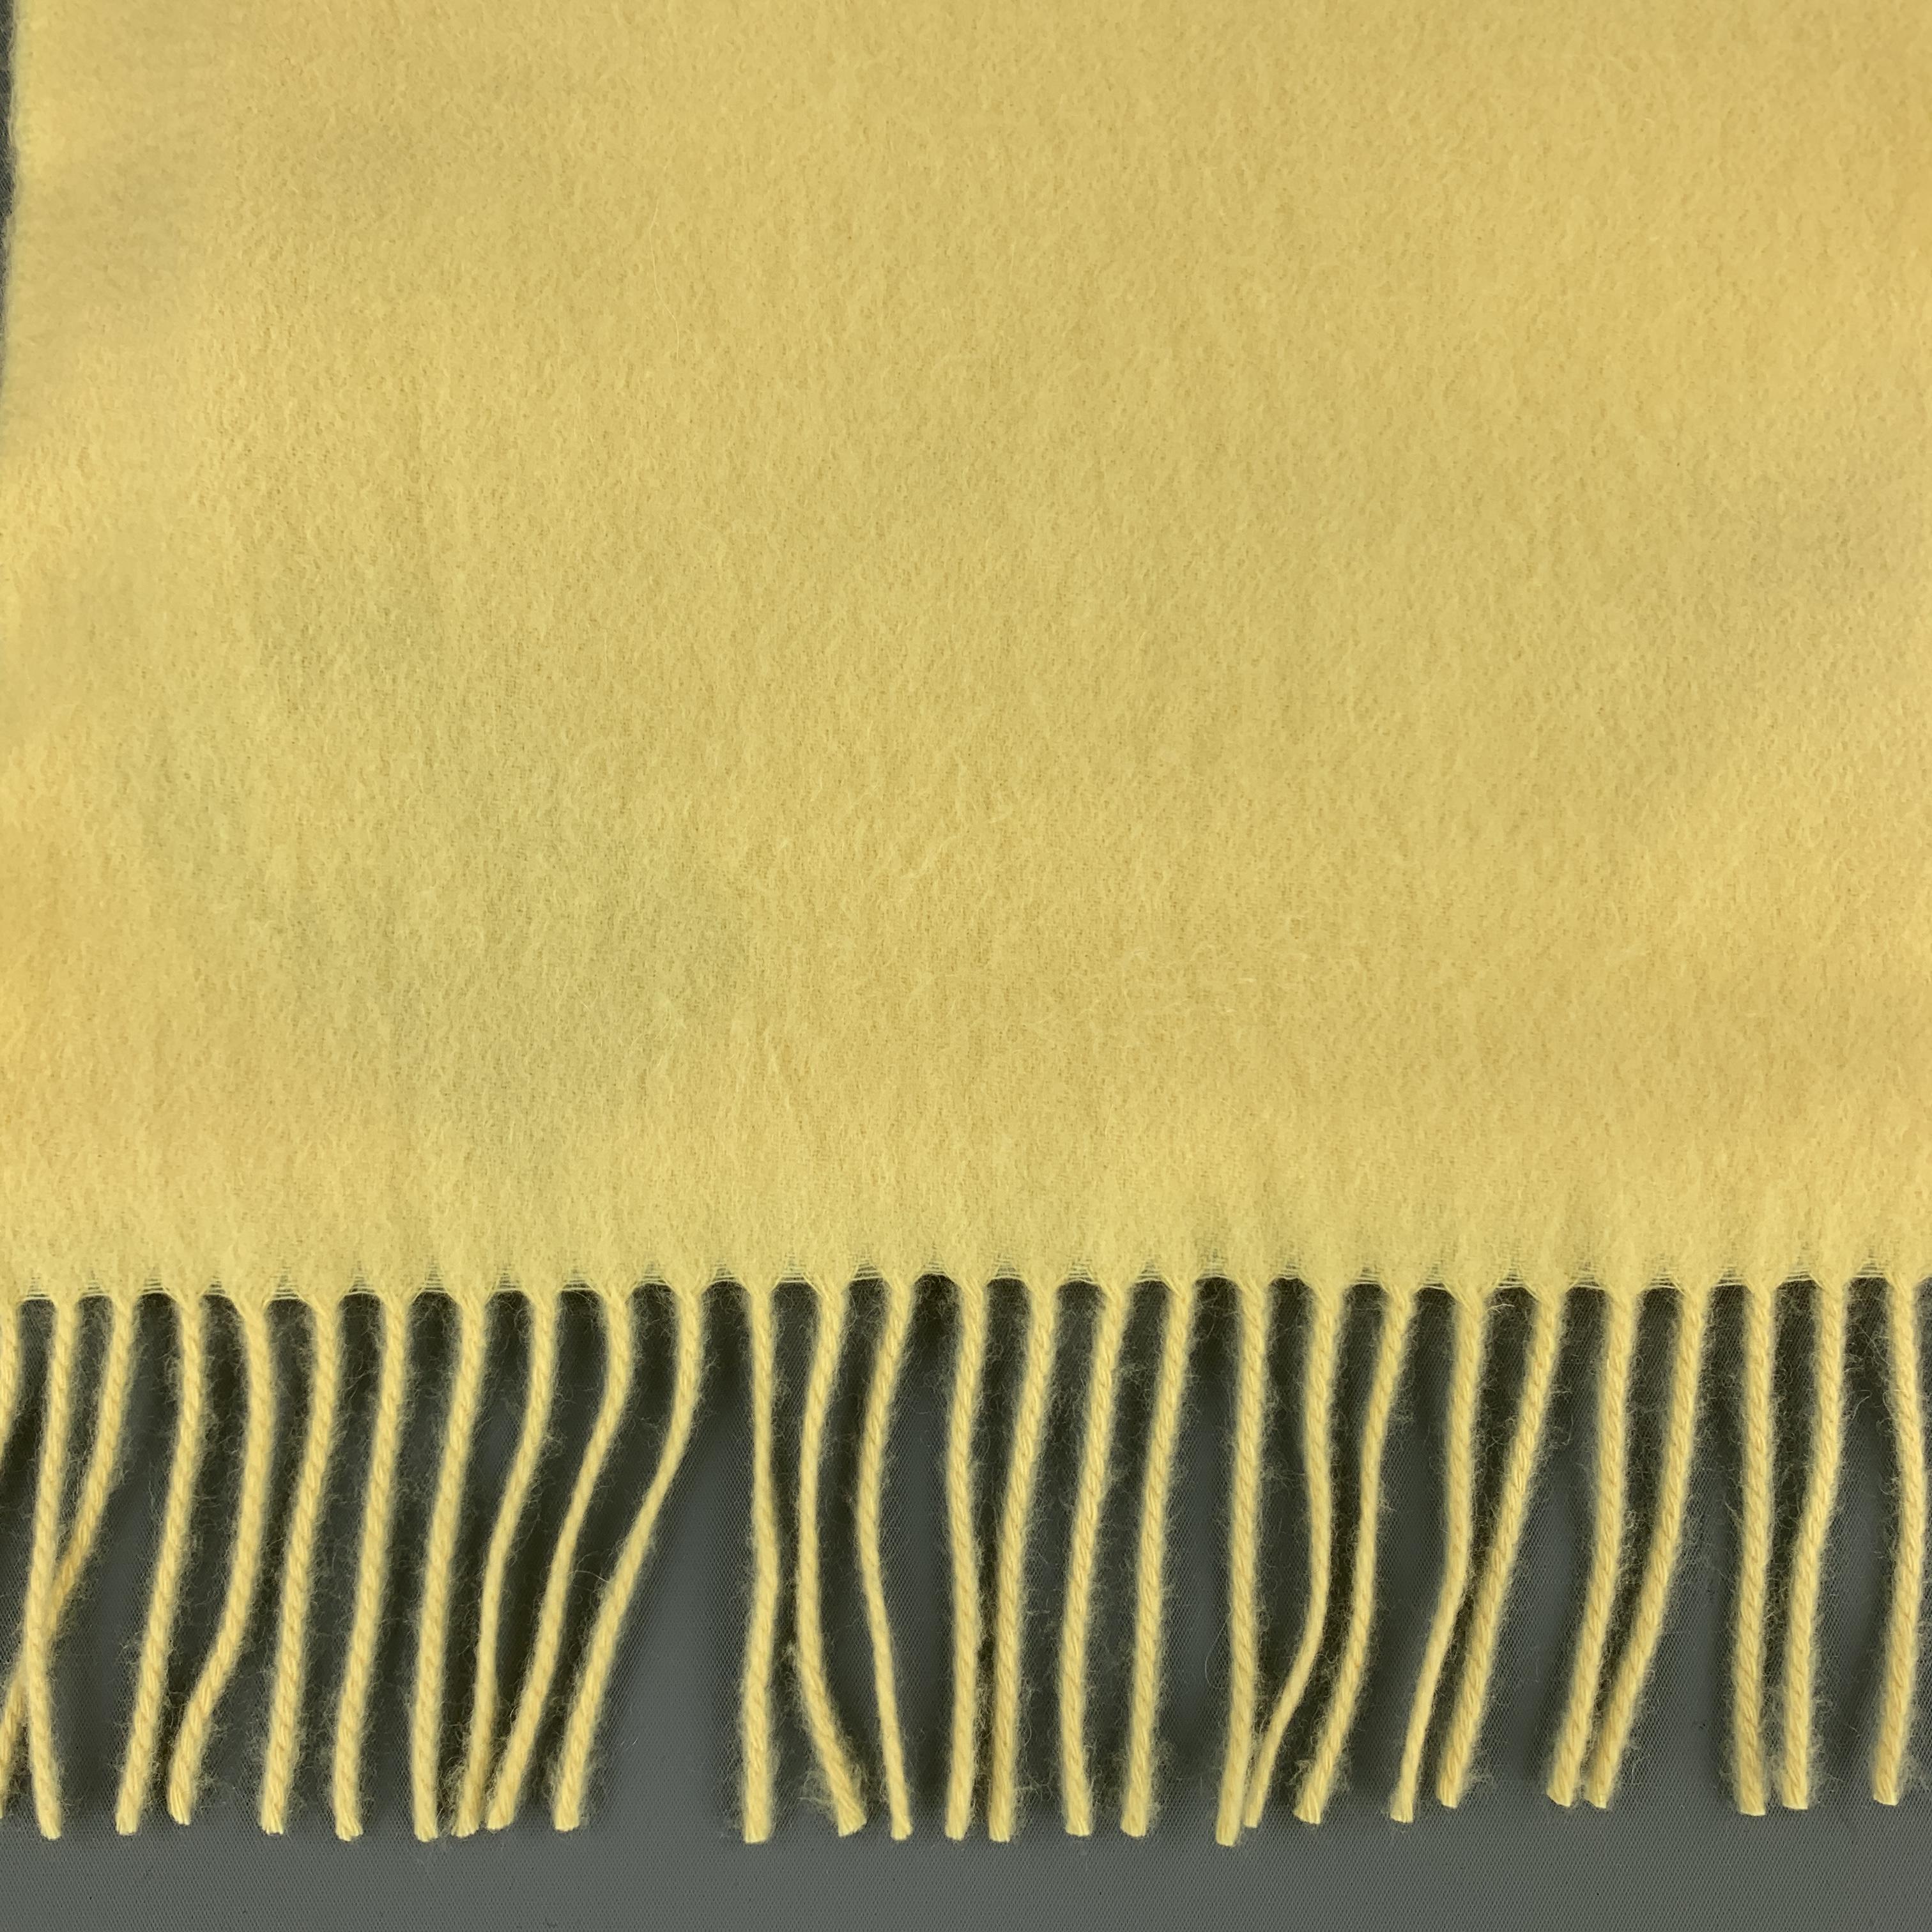 LORD winter scarf comes in pastel yellow cashmere with two and a half inch fringe trim. Made in Scotland.

Excellent Pre-Owned Condition.

55 X 12.5 in.